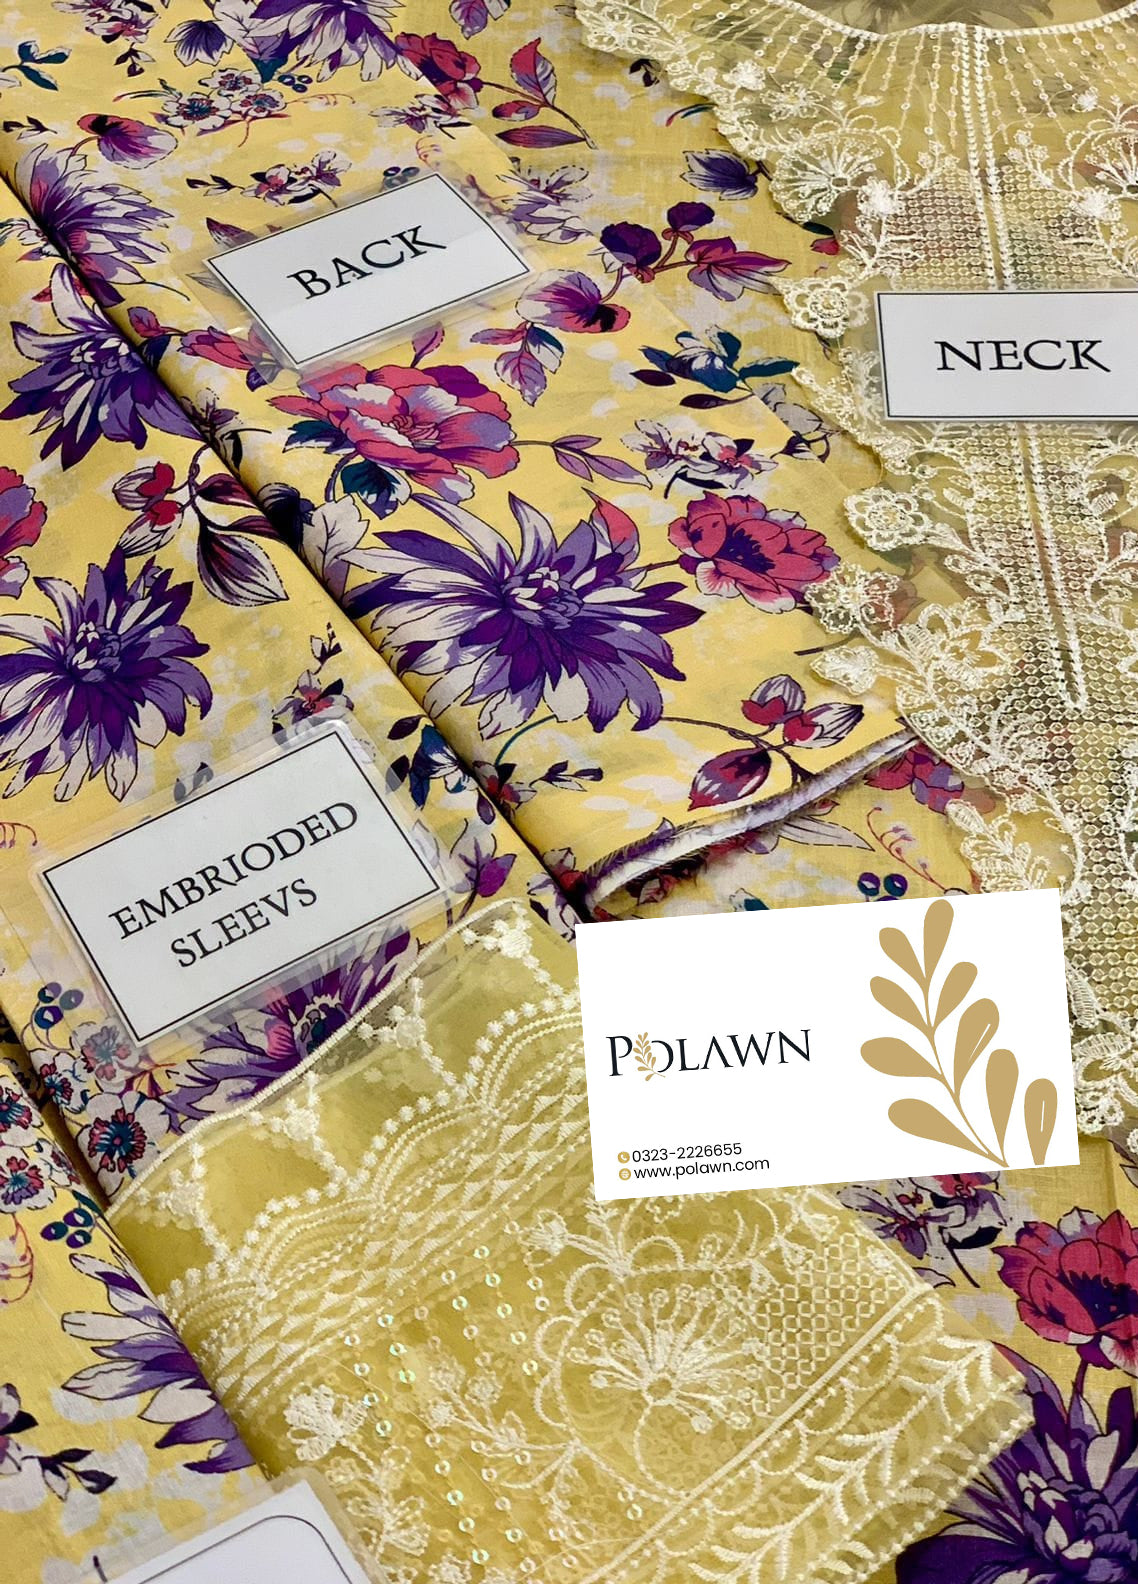 Embroidered Lawn 3 Piece Unstitched Suit AL-Tuscany-24 - Summer Collection